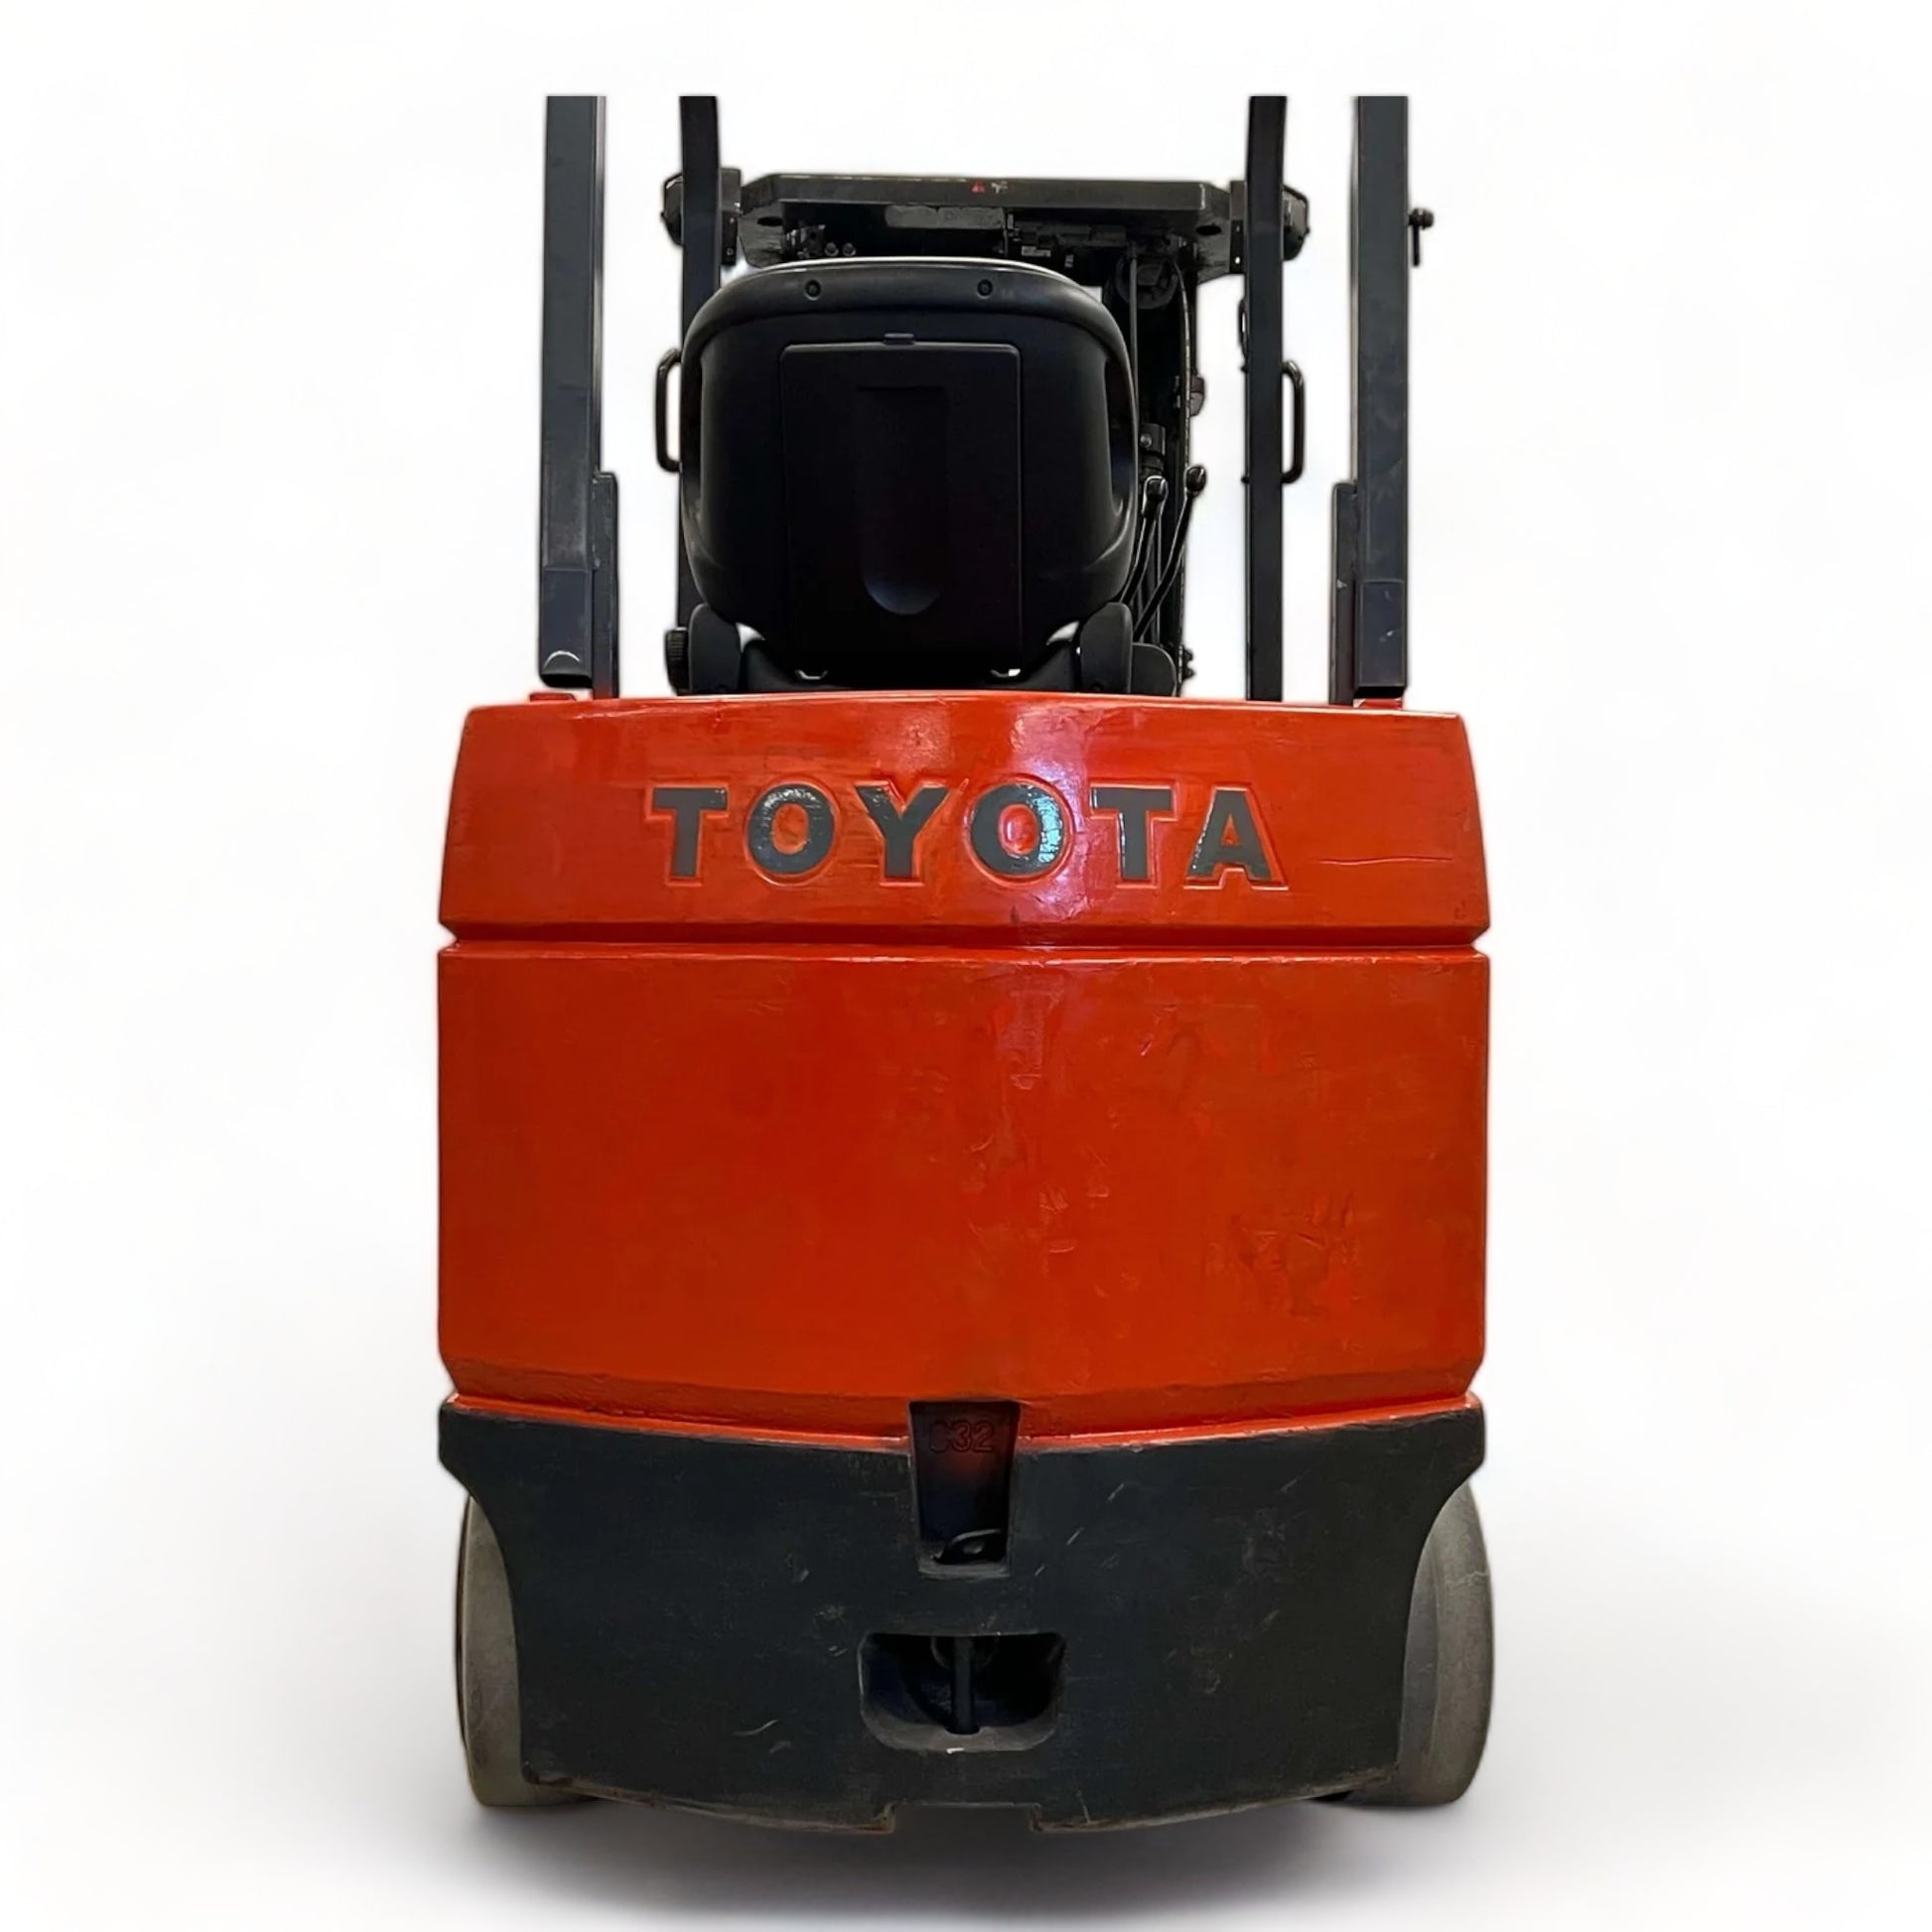 Toyota 7FBCU32 Electric Forklift 5720 lbs + 187'' Capacity